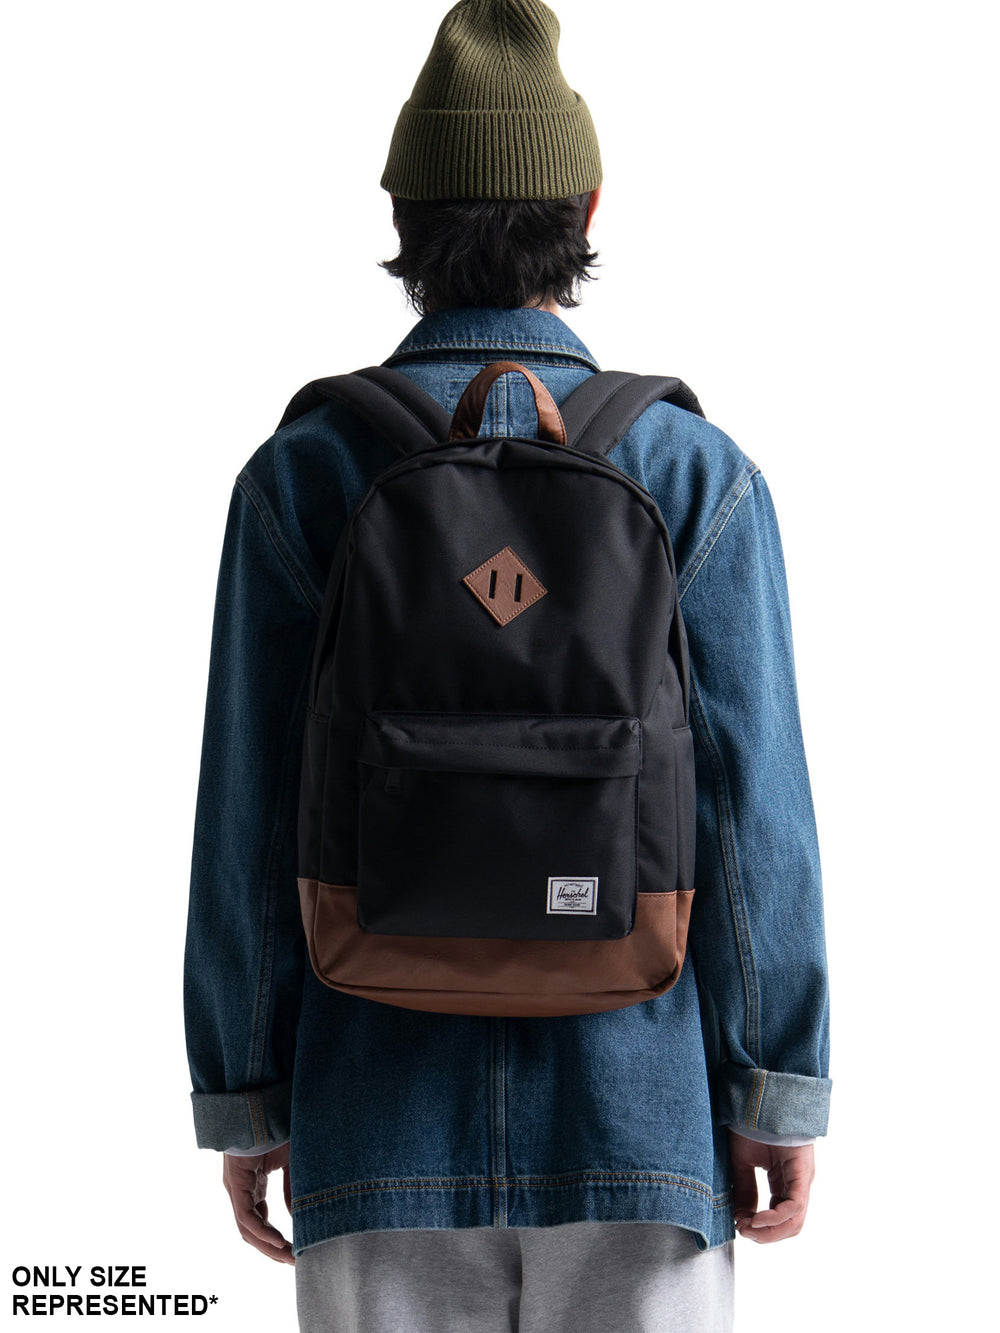 HERSCHEL SUPPLY CO. HERITAGE - CLEARANCE